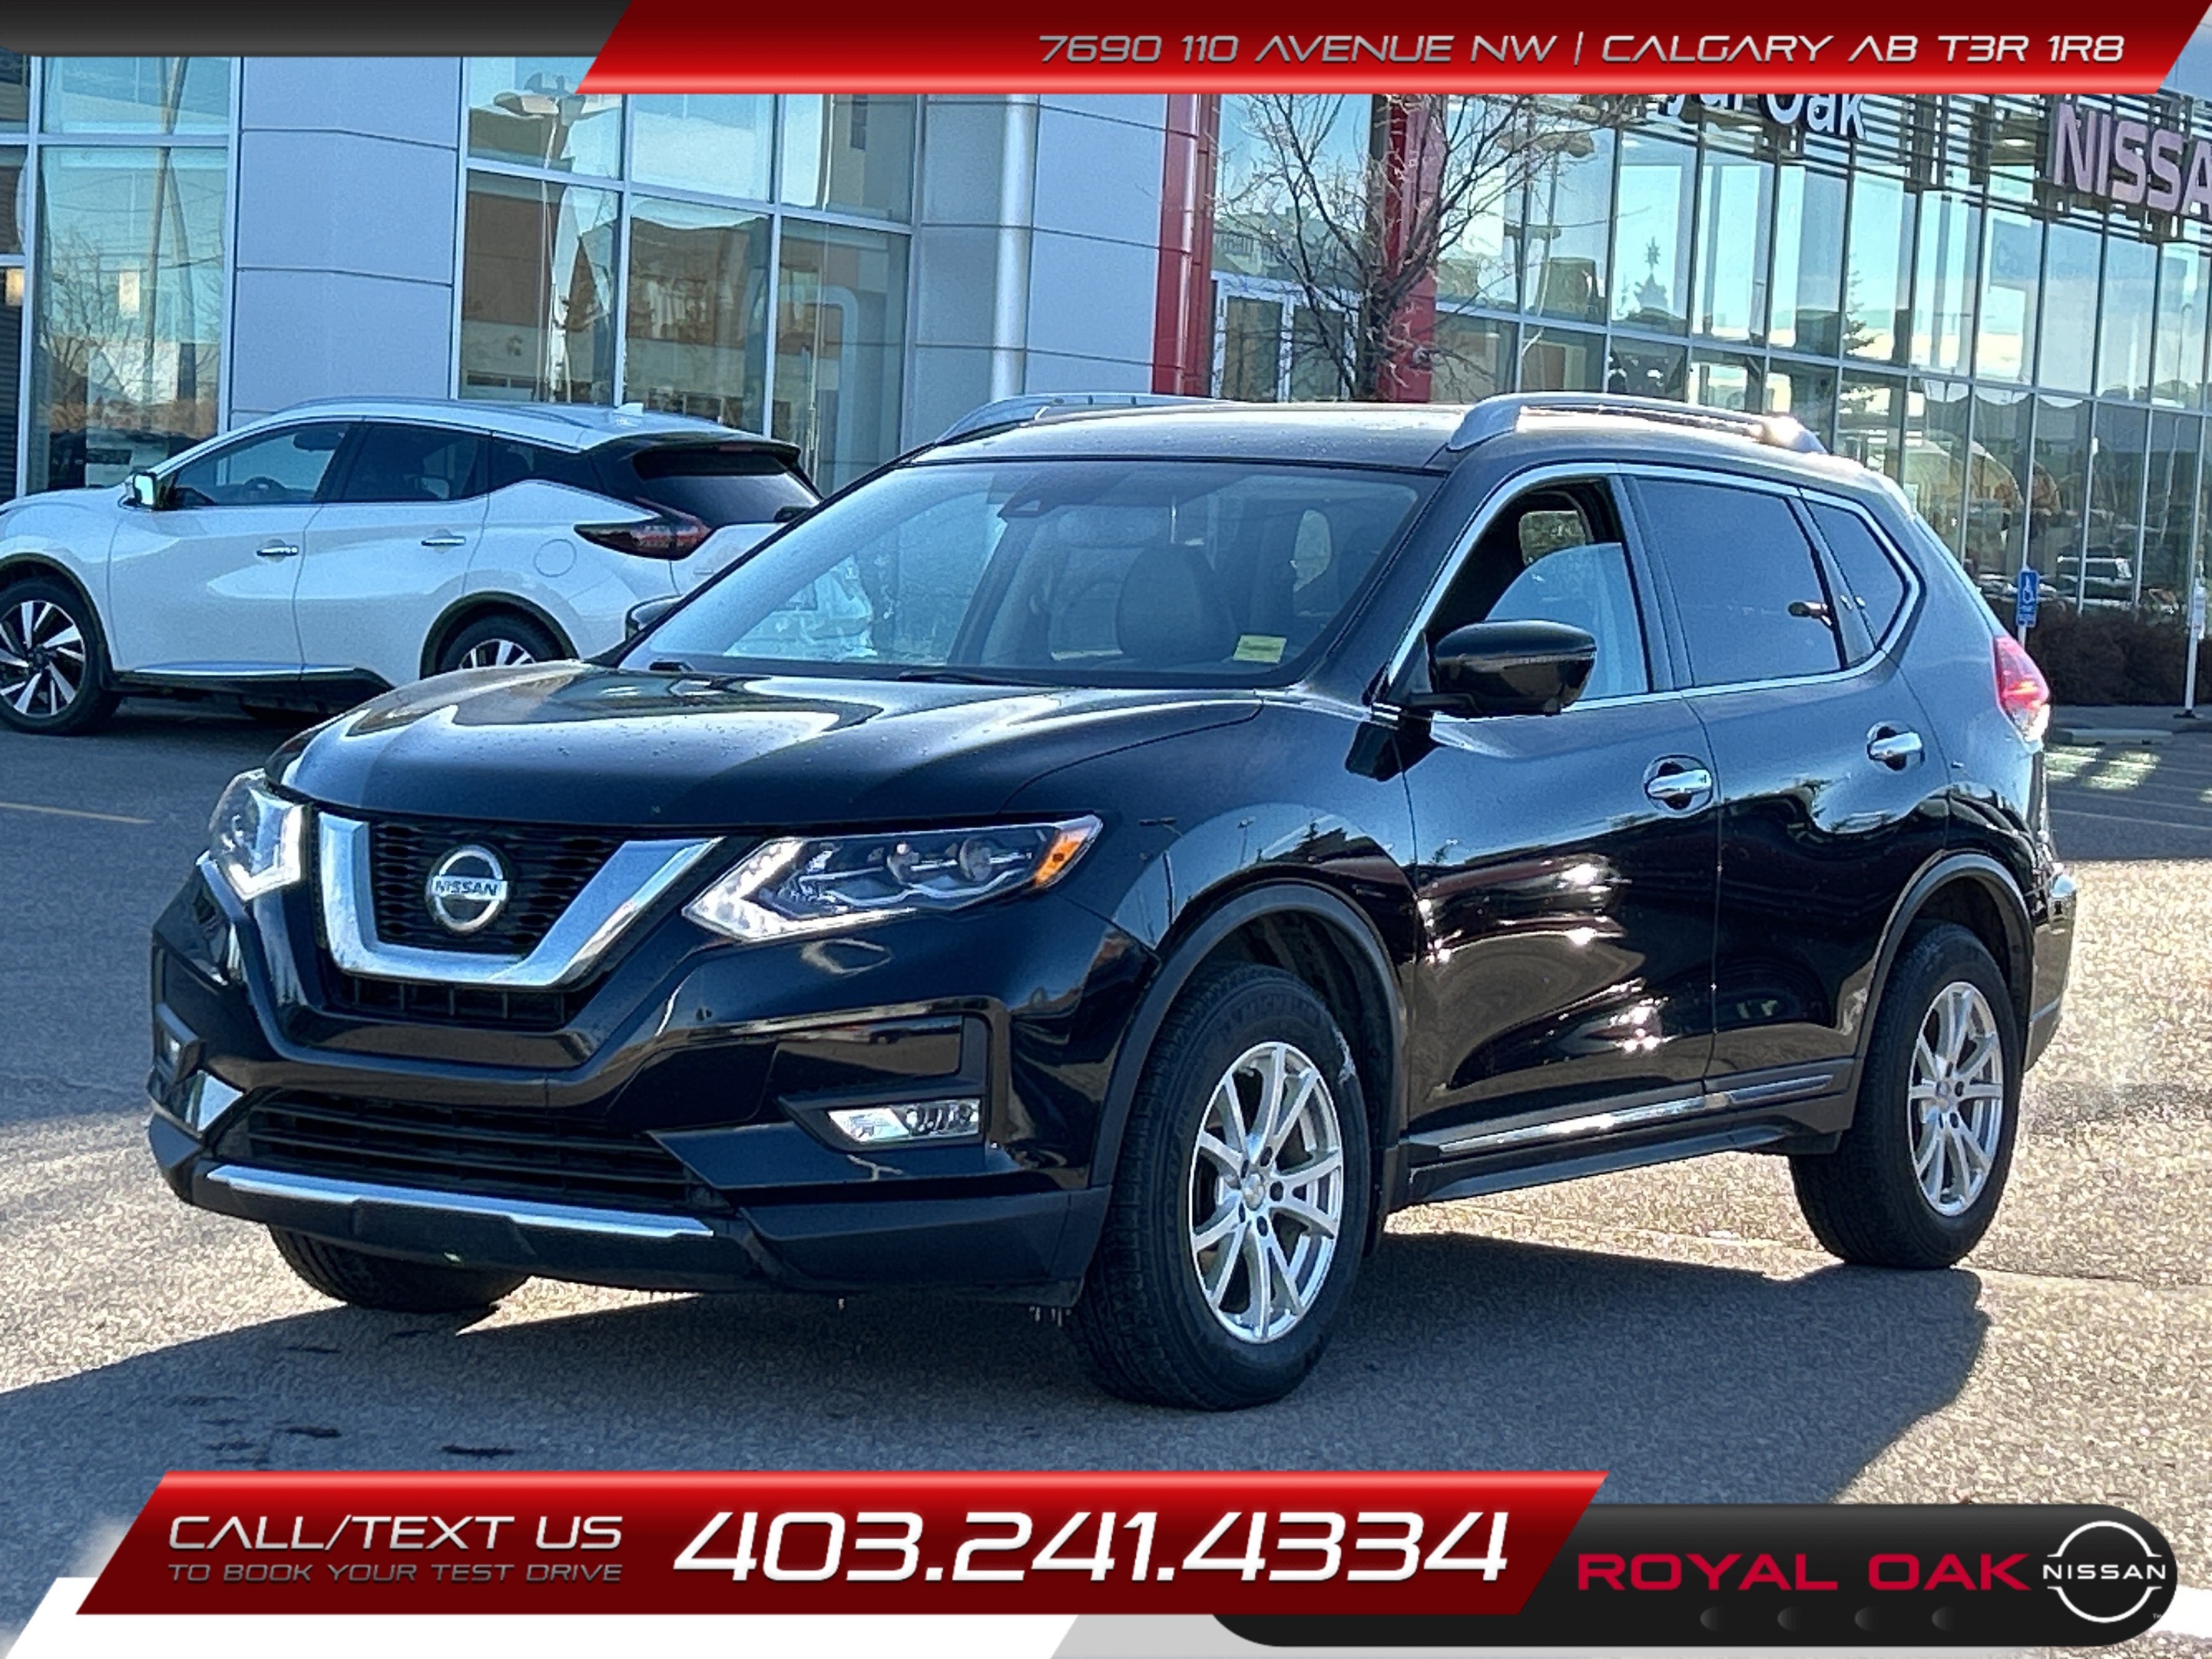 2018 Nissan Rogue SL AWD - Certified Pre-Owned Vehicle (CPO)